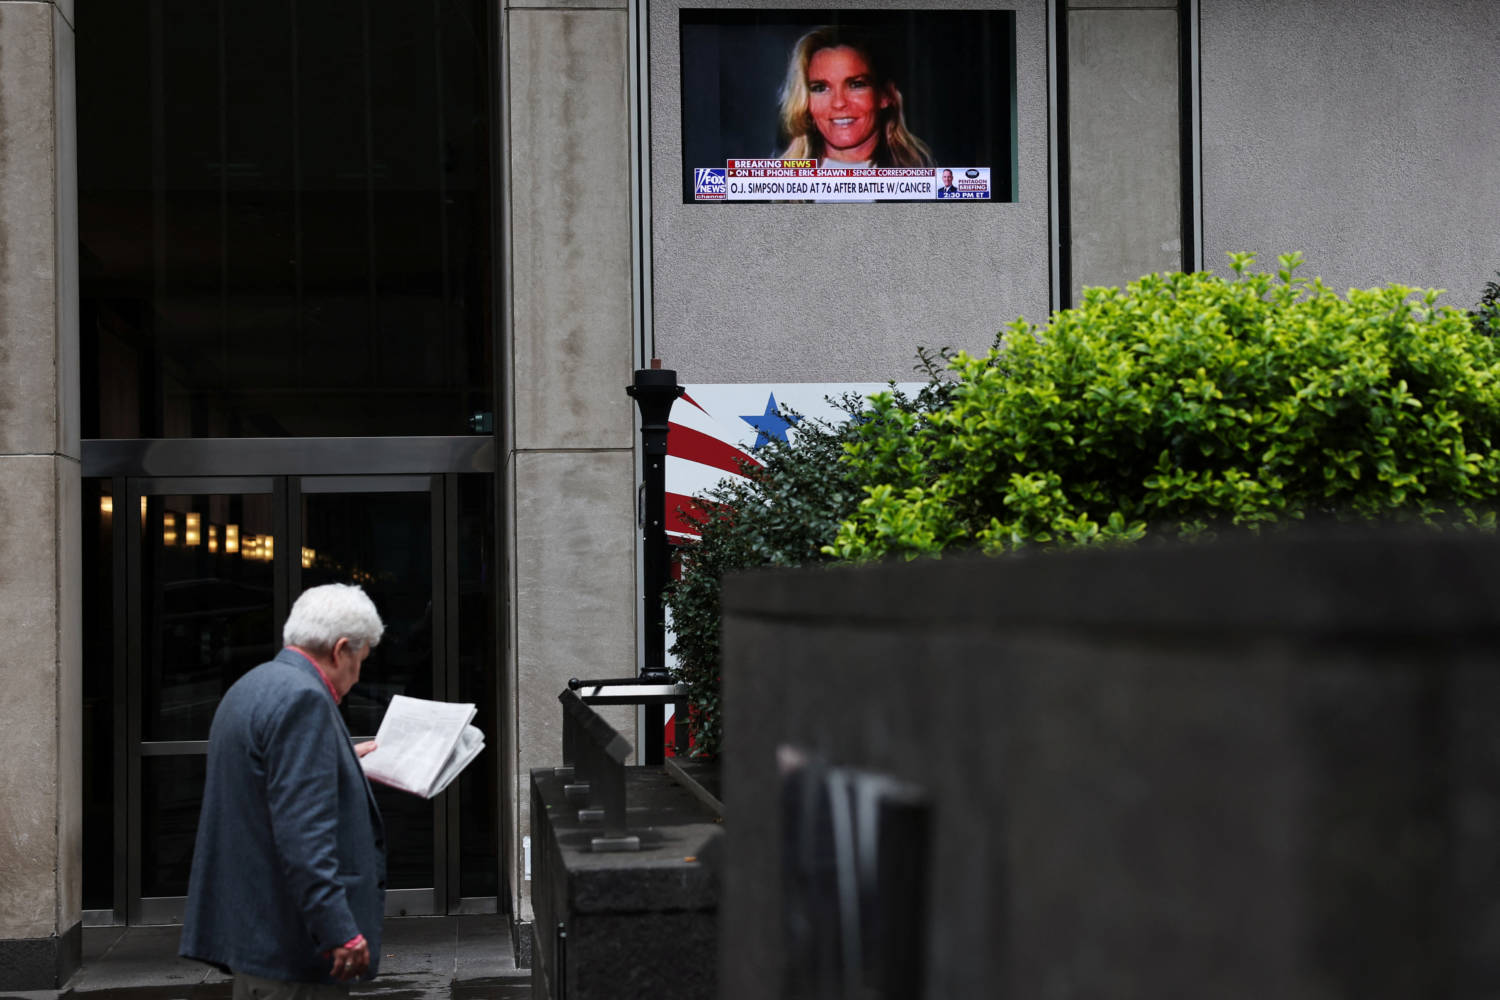 O.j.simpson Picture On Fox Television Reporting His Death At The News Corp. Building In New York City